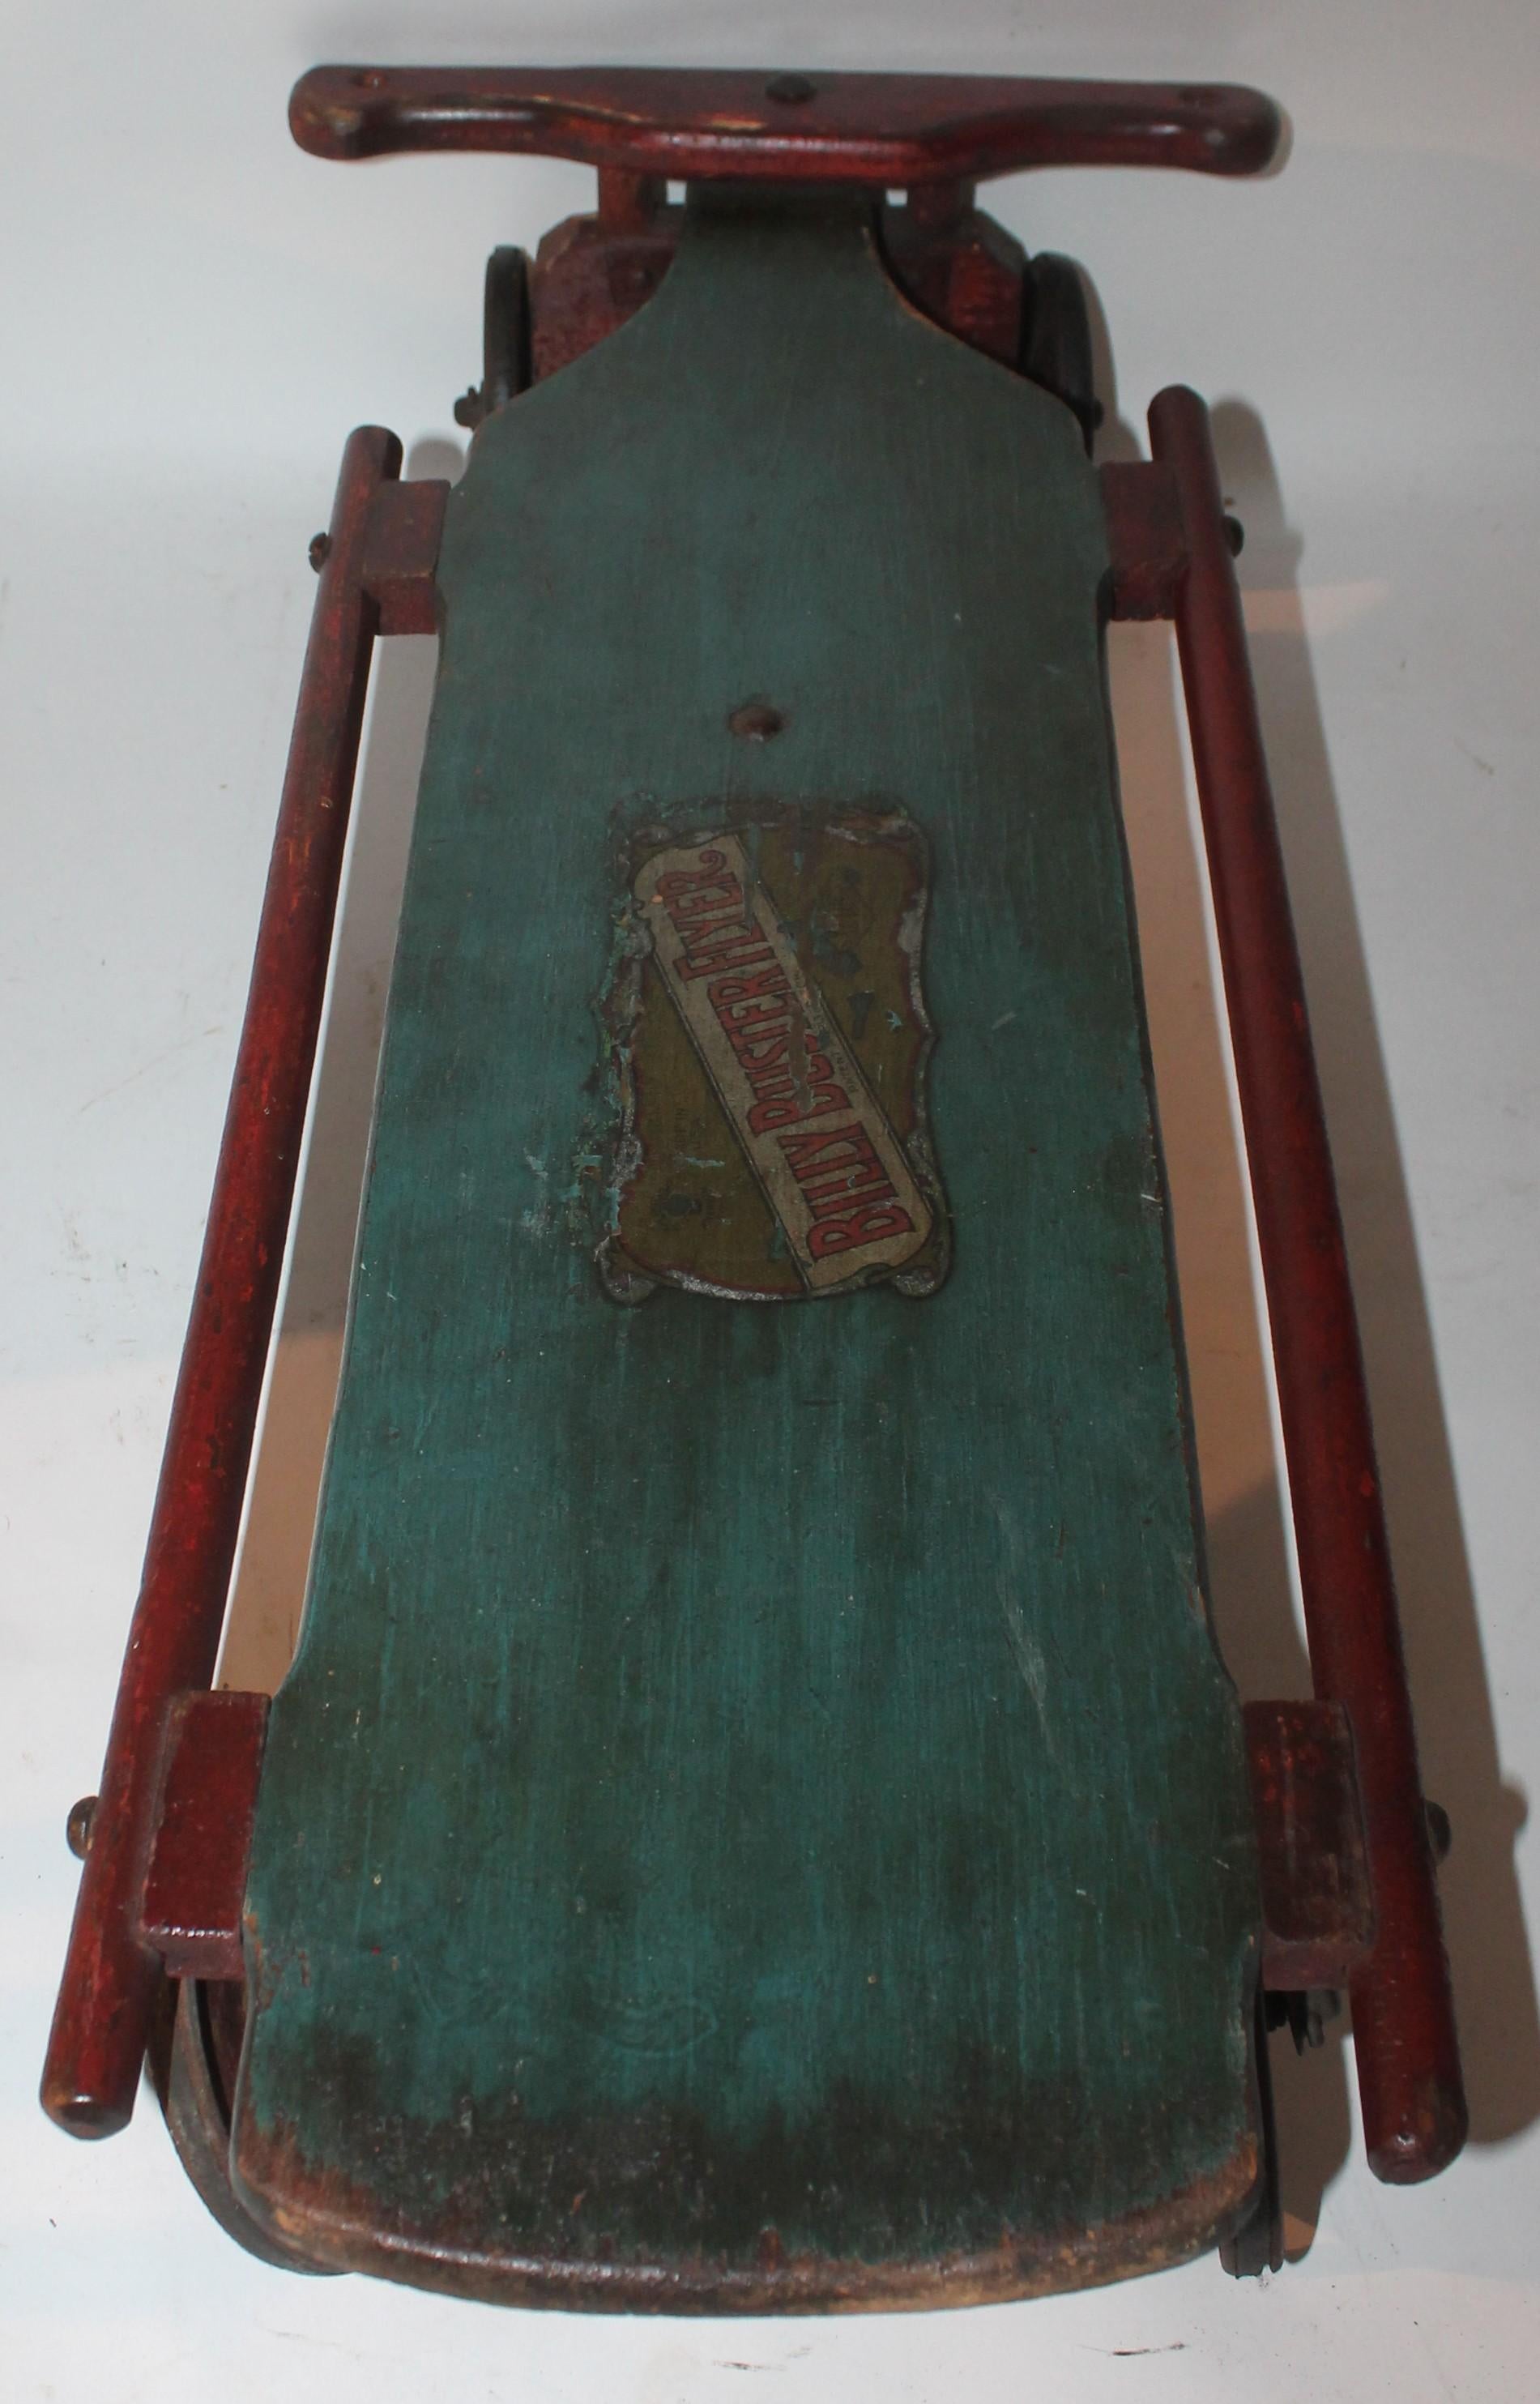 19th century original painted Billy buster flyer sled with wheels. The toy is painted blue & red wood with tin wheels. The condition is all original and very strong in working order.